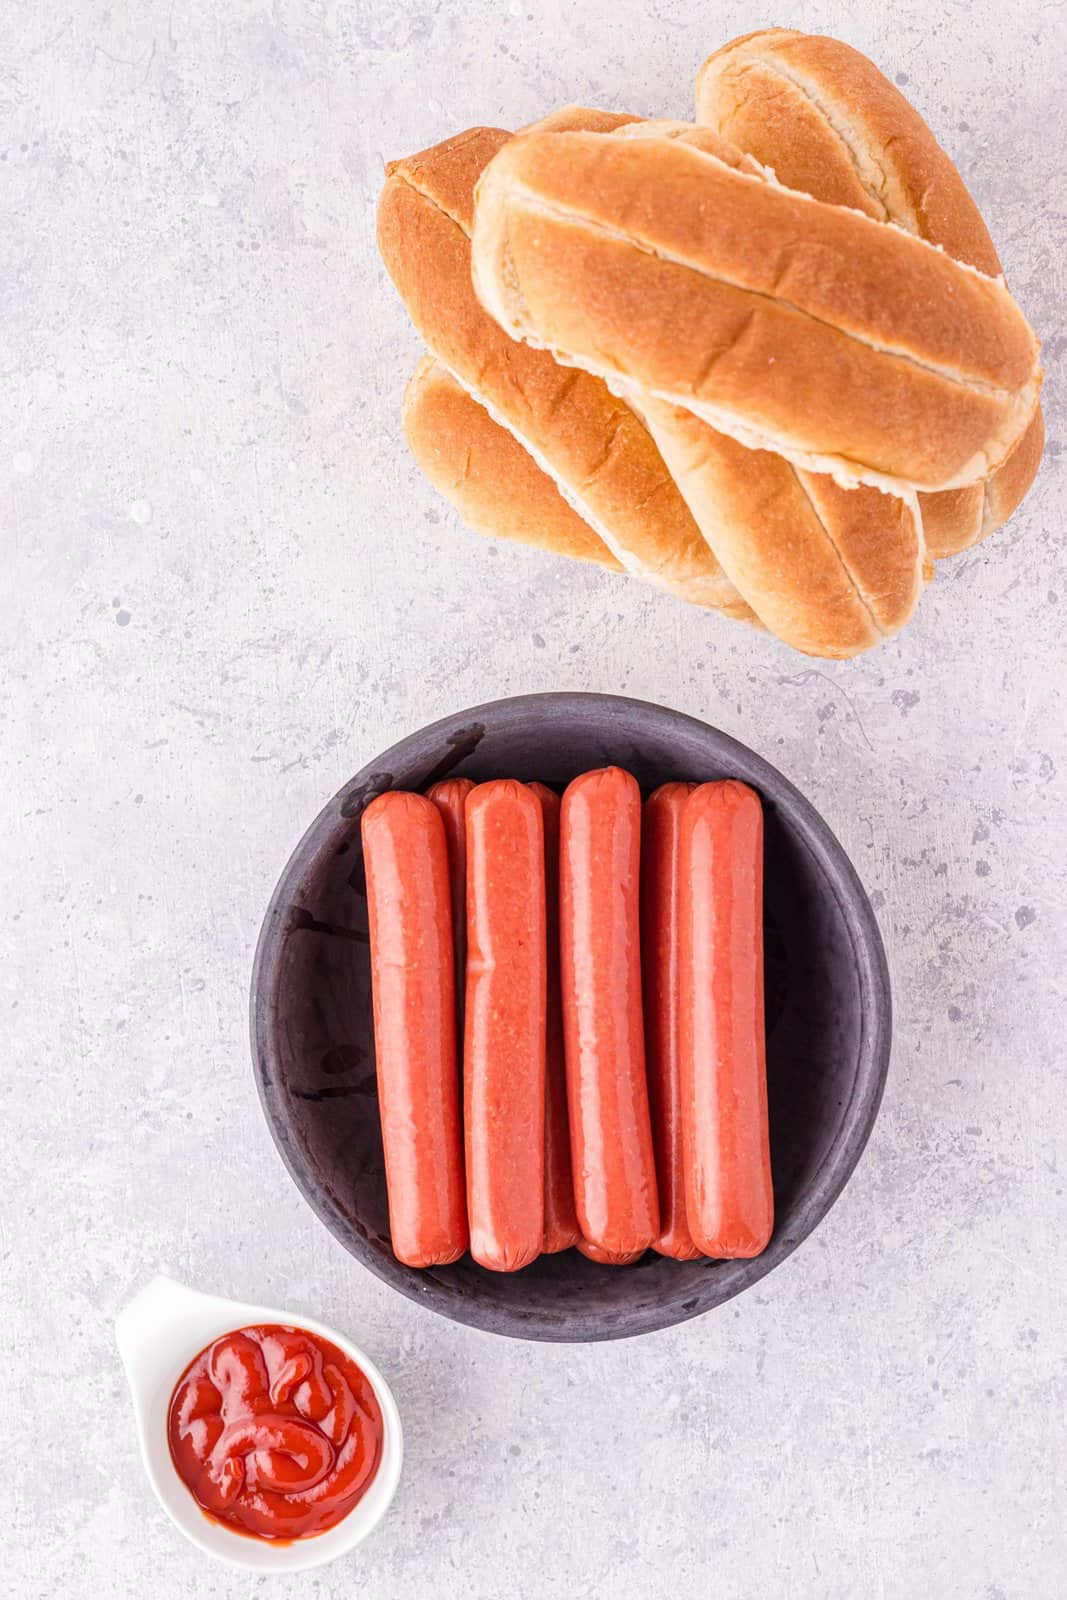 Ingredients needed: hot dogs, ketchup, hot dog buns.